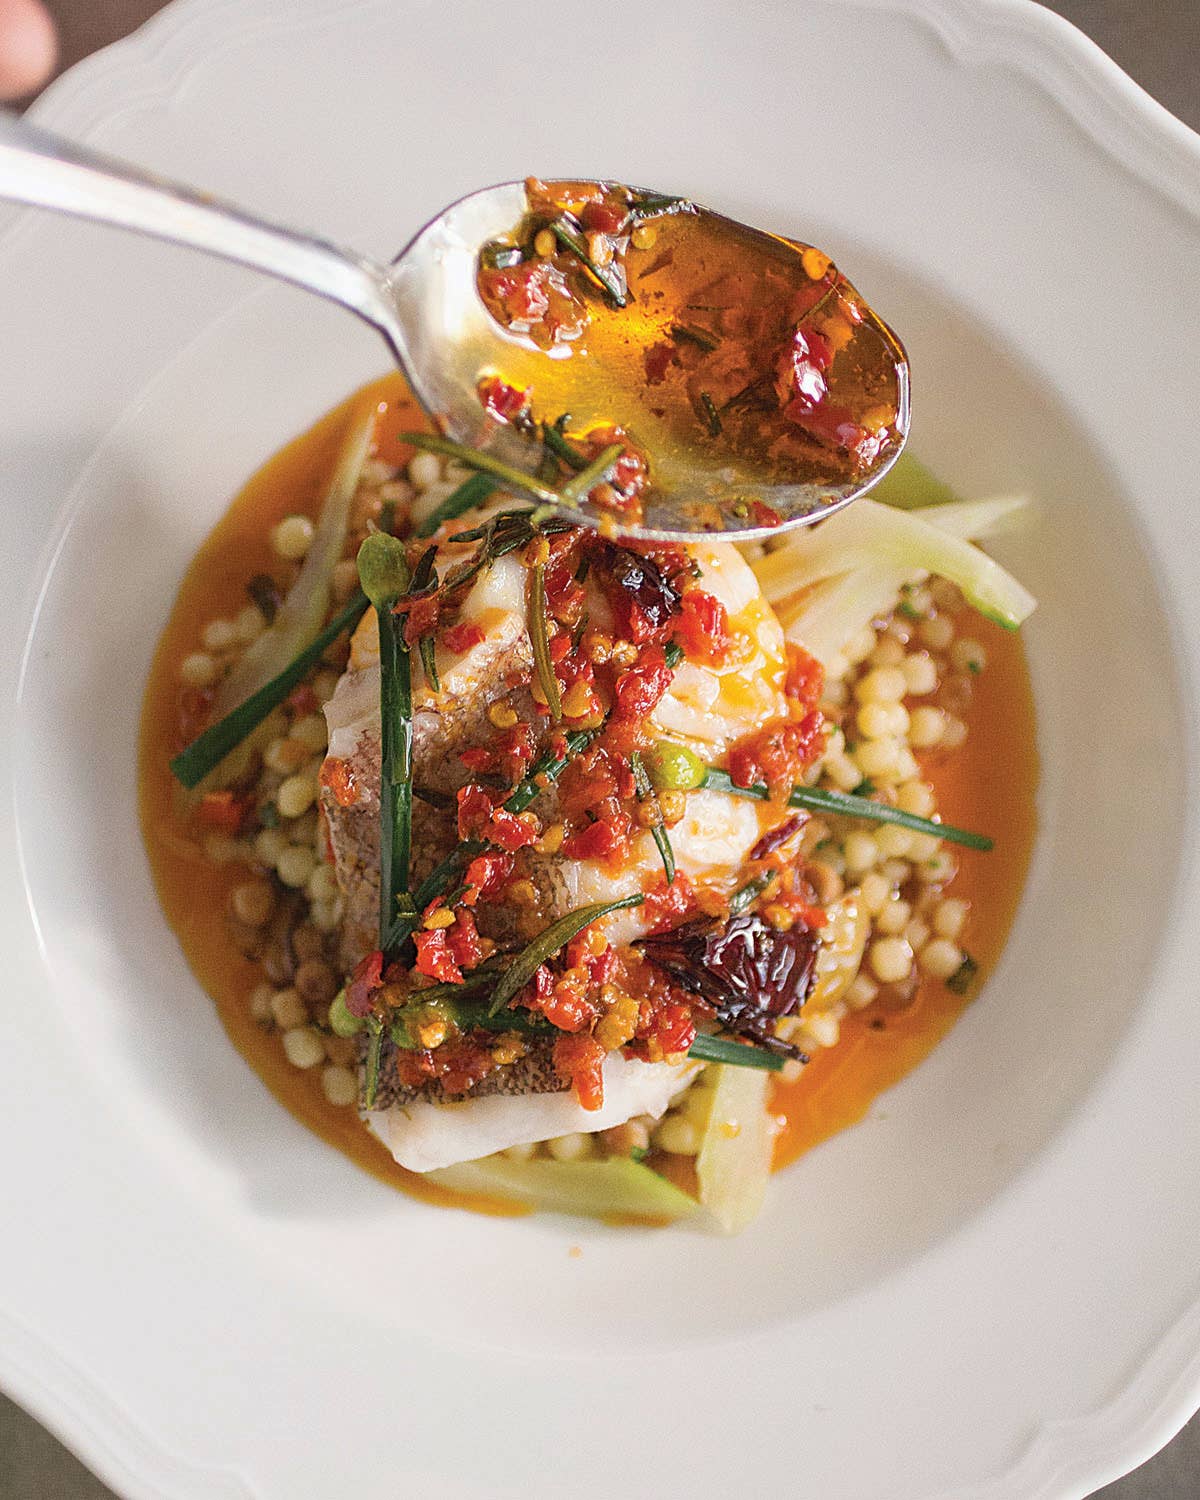 Calabrian chiles and chile paste produce a fiery, brick-red oil that is spooned over delicate steamed fish, crunchy spring vegetables, and fregola, a Sardinian pasta similar to Israeli couscous.